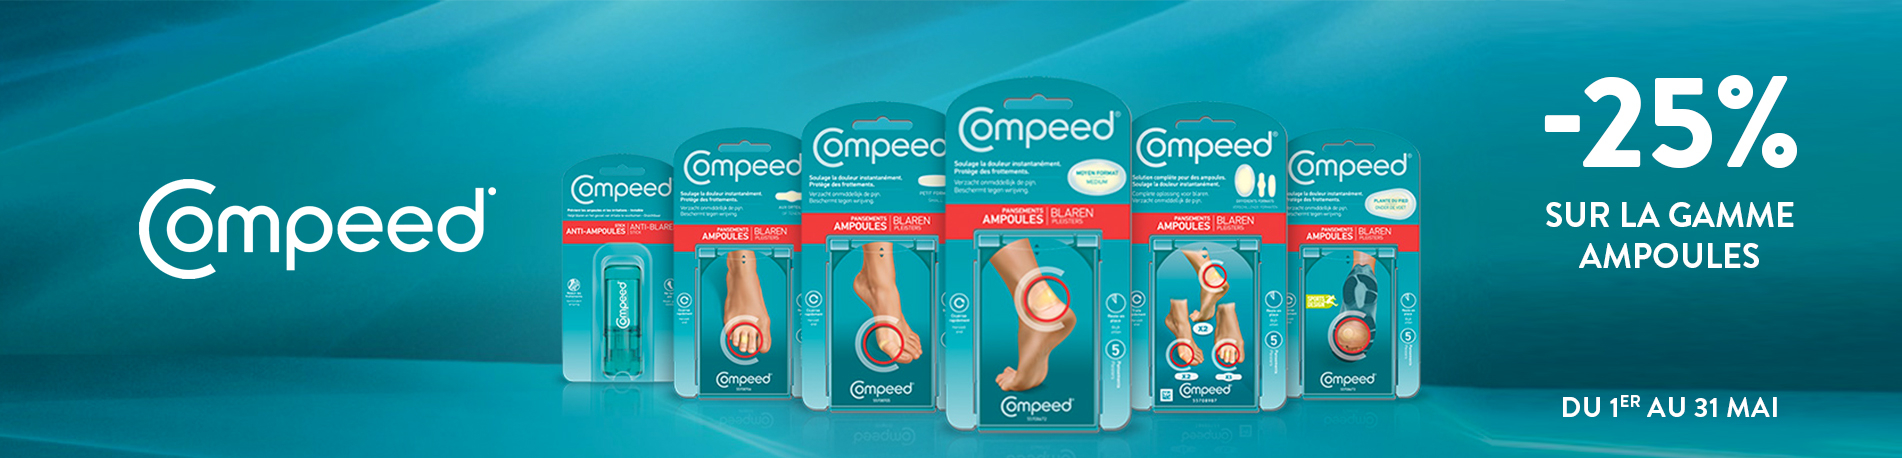 Promotion Compeed ampoules